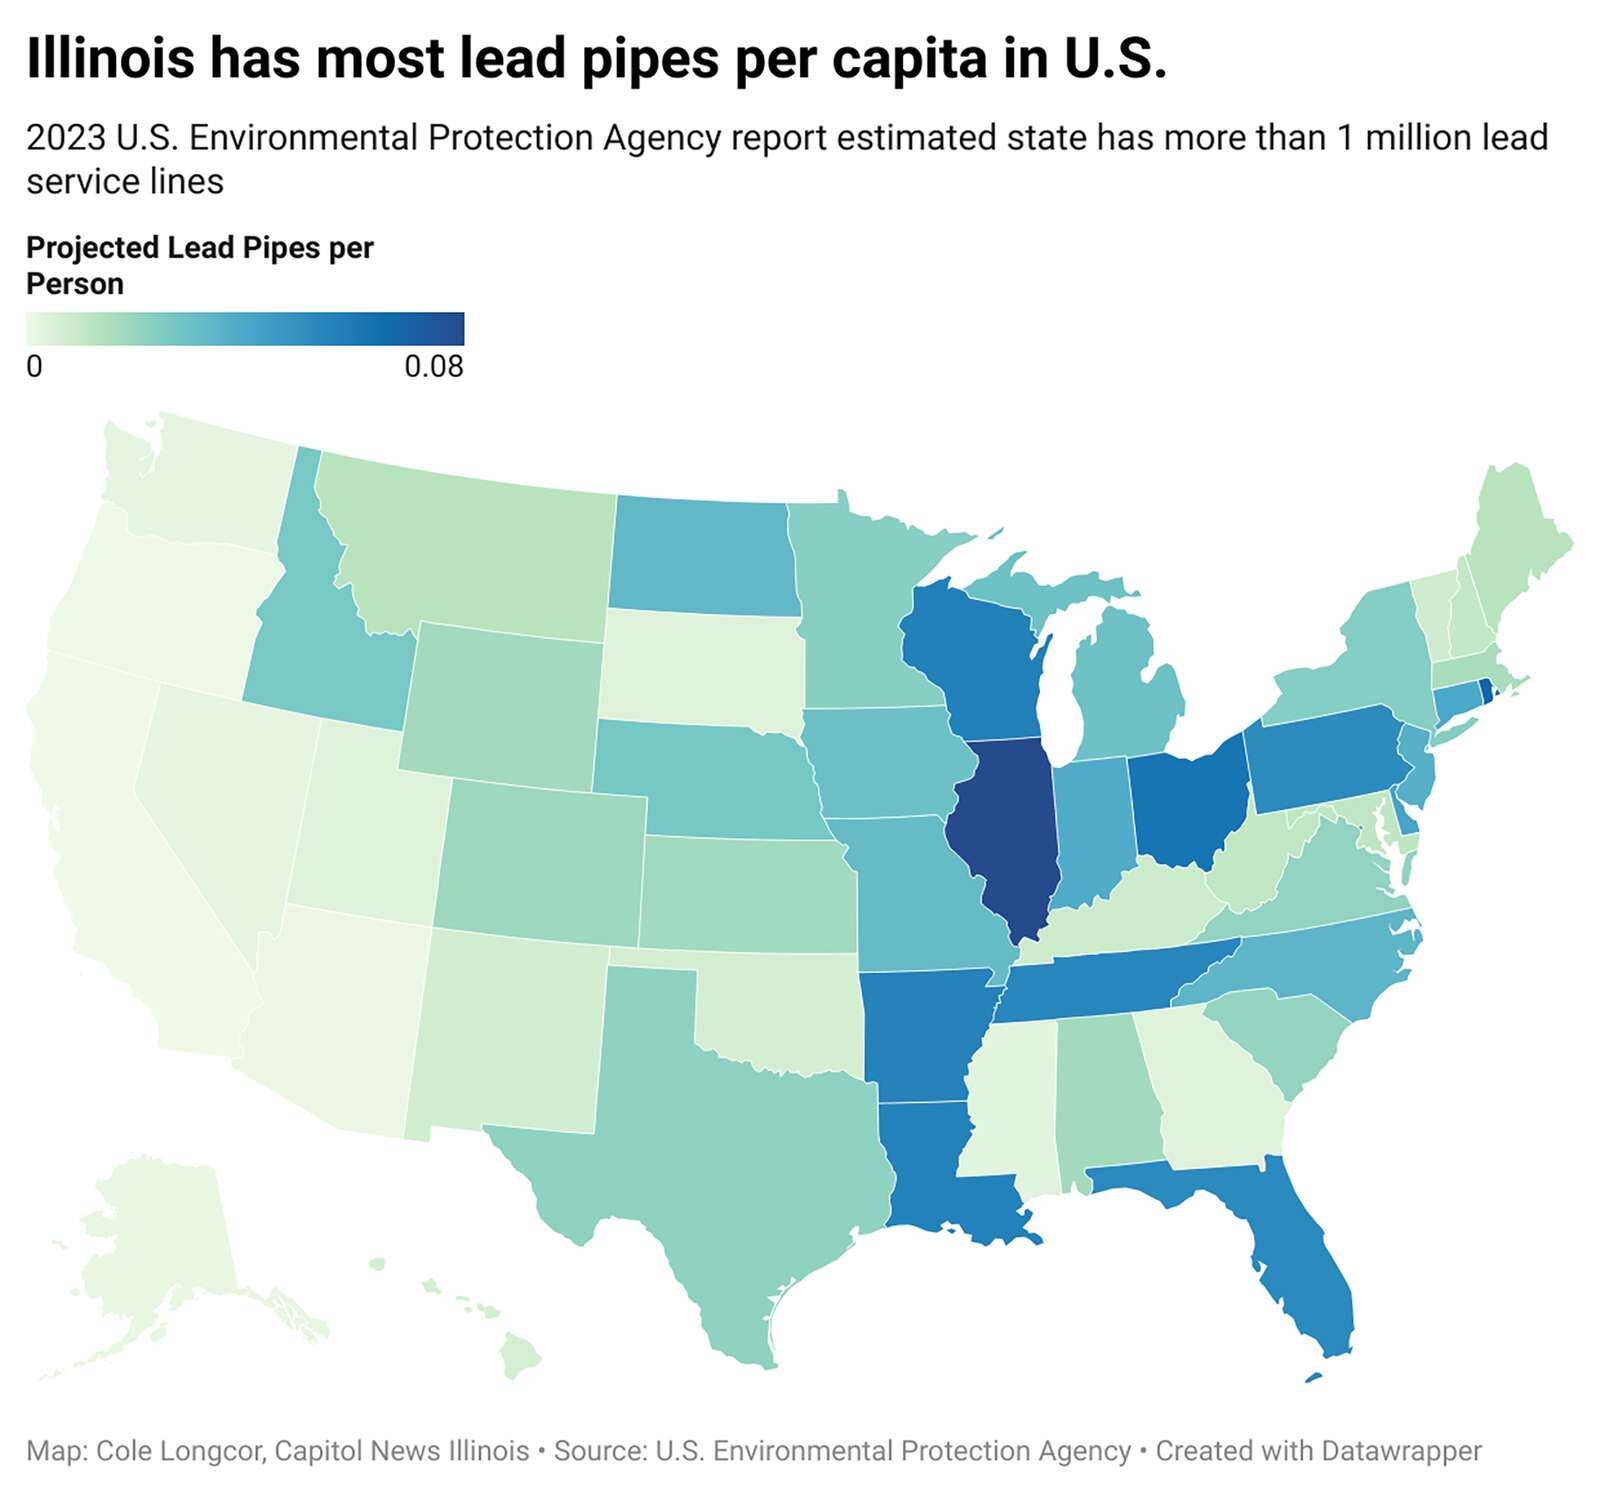 As Illinois continues to inventory lead pipes, full replacement deadlines are decades away